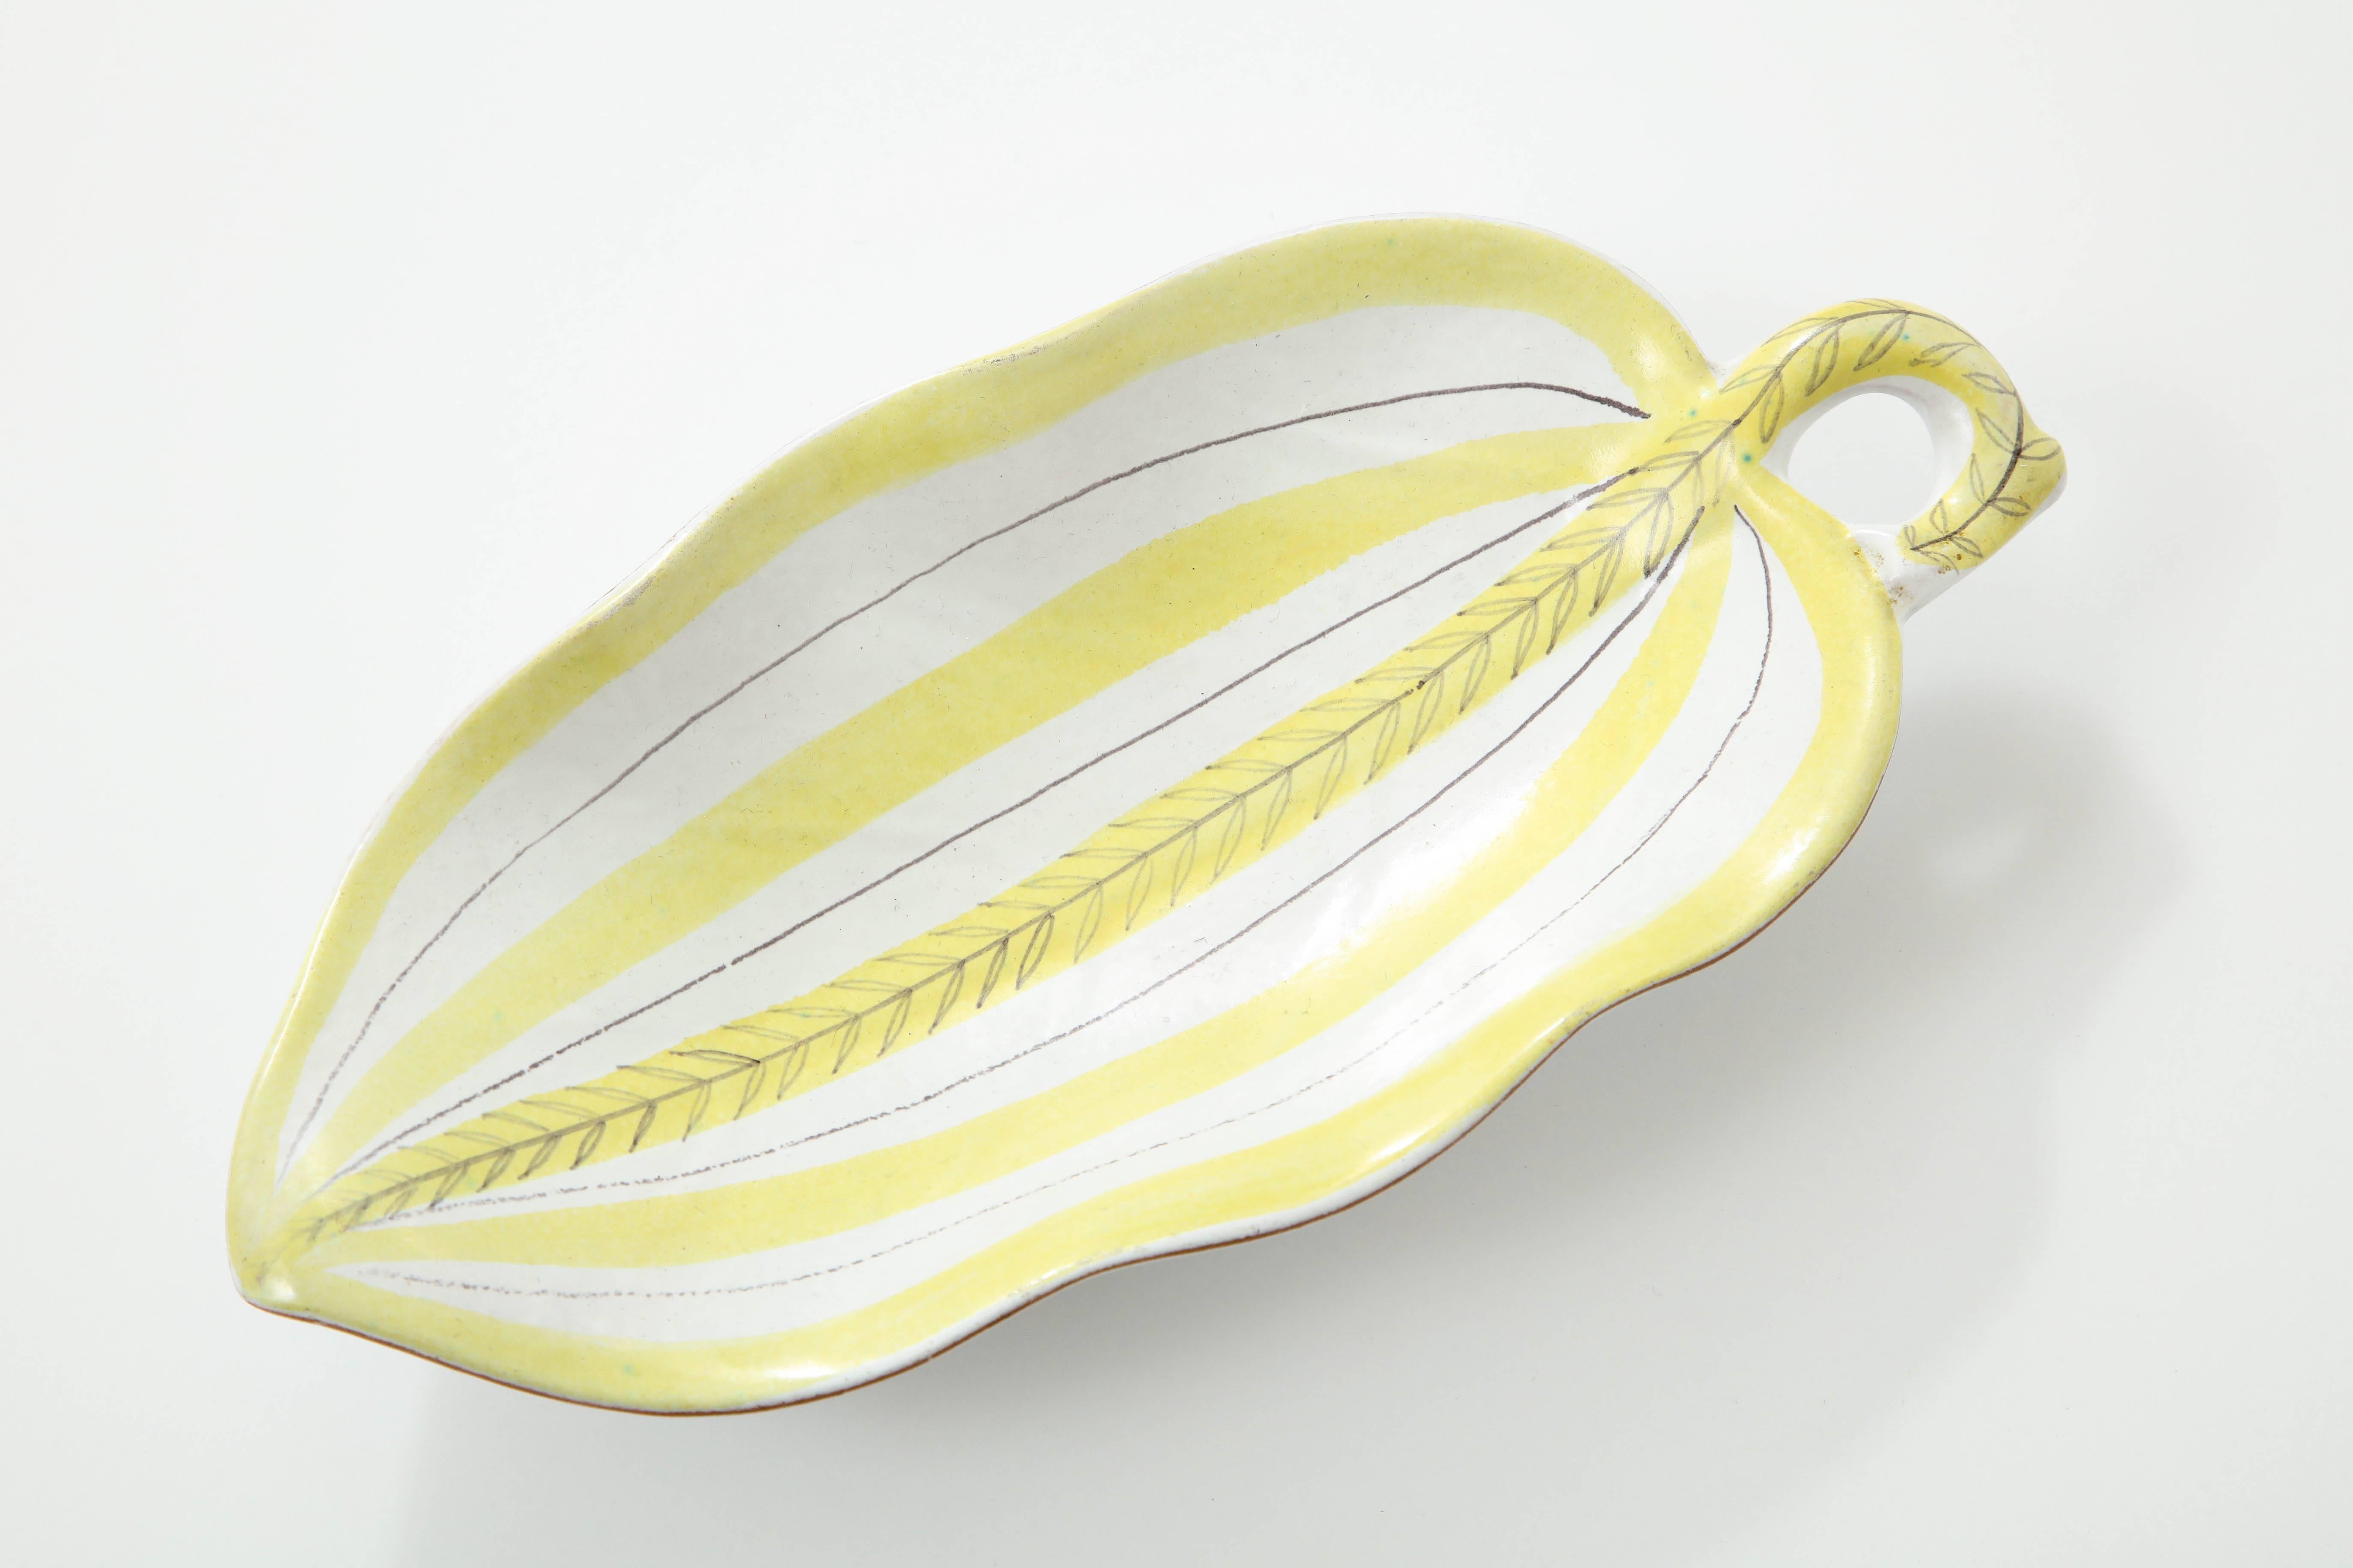 Decorative leaf shaped bowl by Stig Lindberg, circa 1950. Very good condition.
Manufactured by Gustavsberg.
An artistic jack-of-all-trades, Stig Lindberg was accomplished in industrial design, textile design, painting, illustration, glassblowing